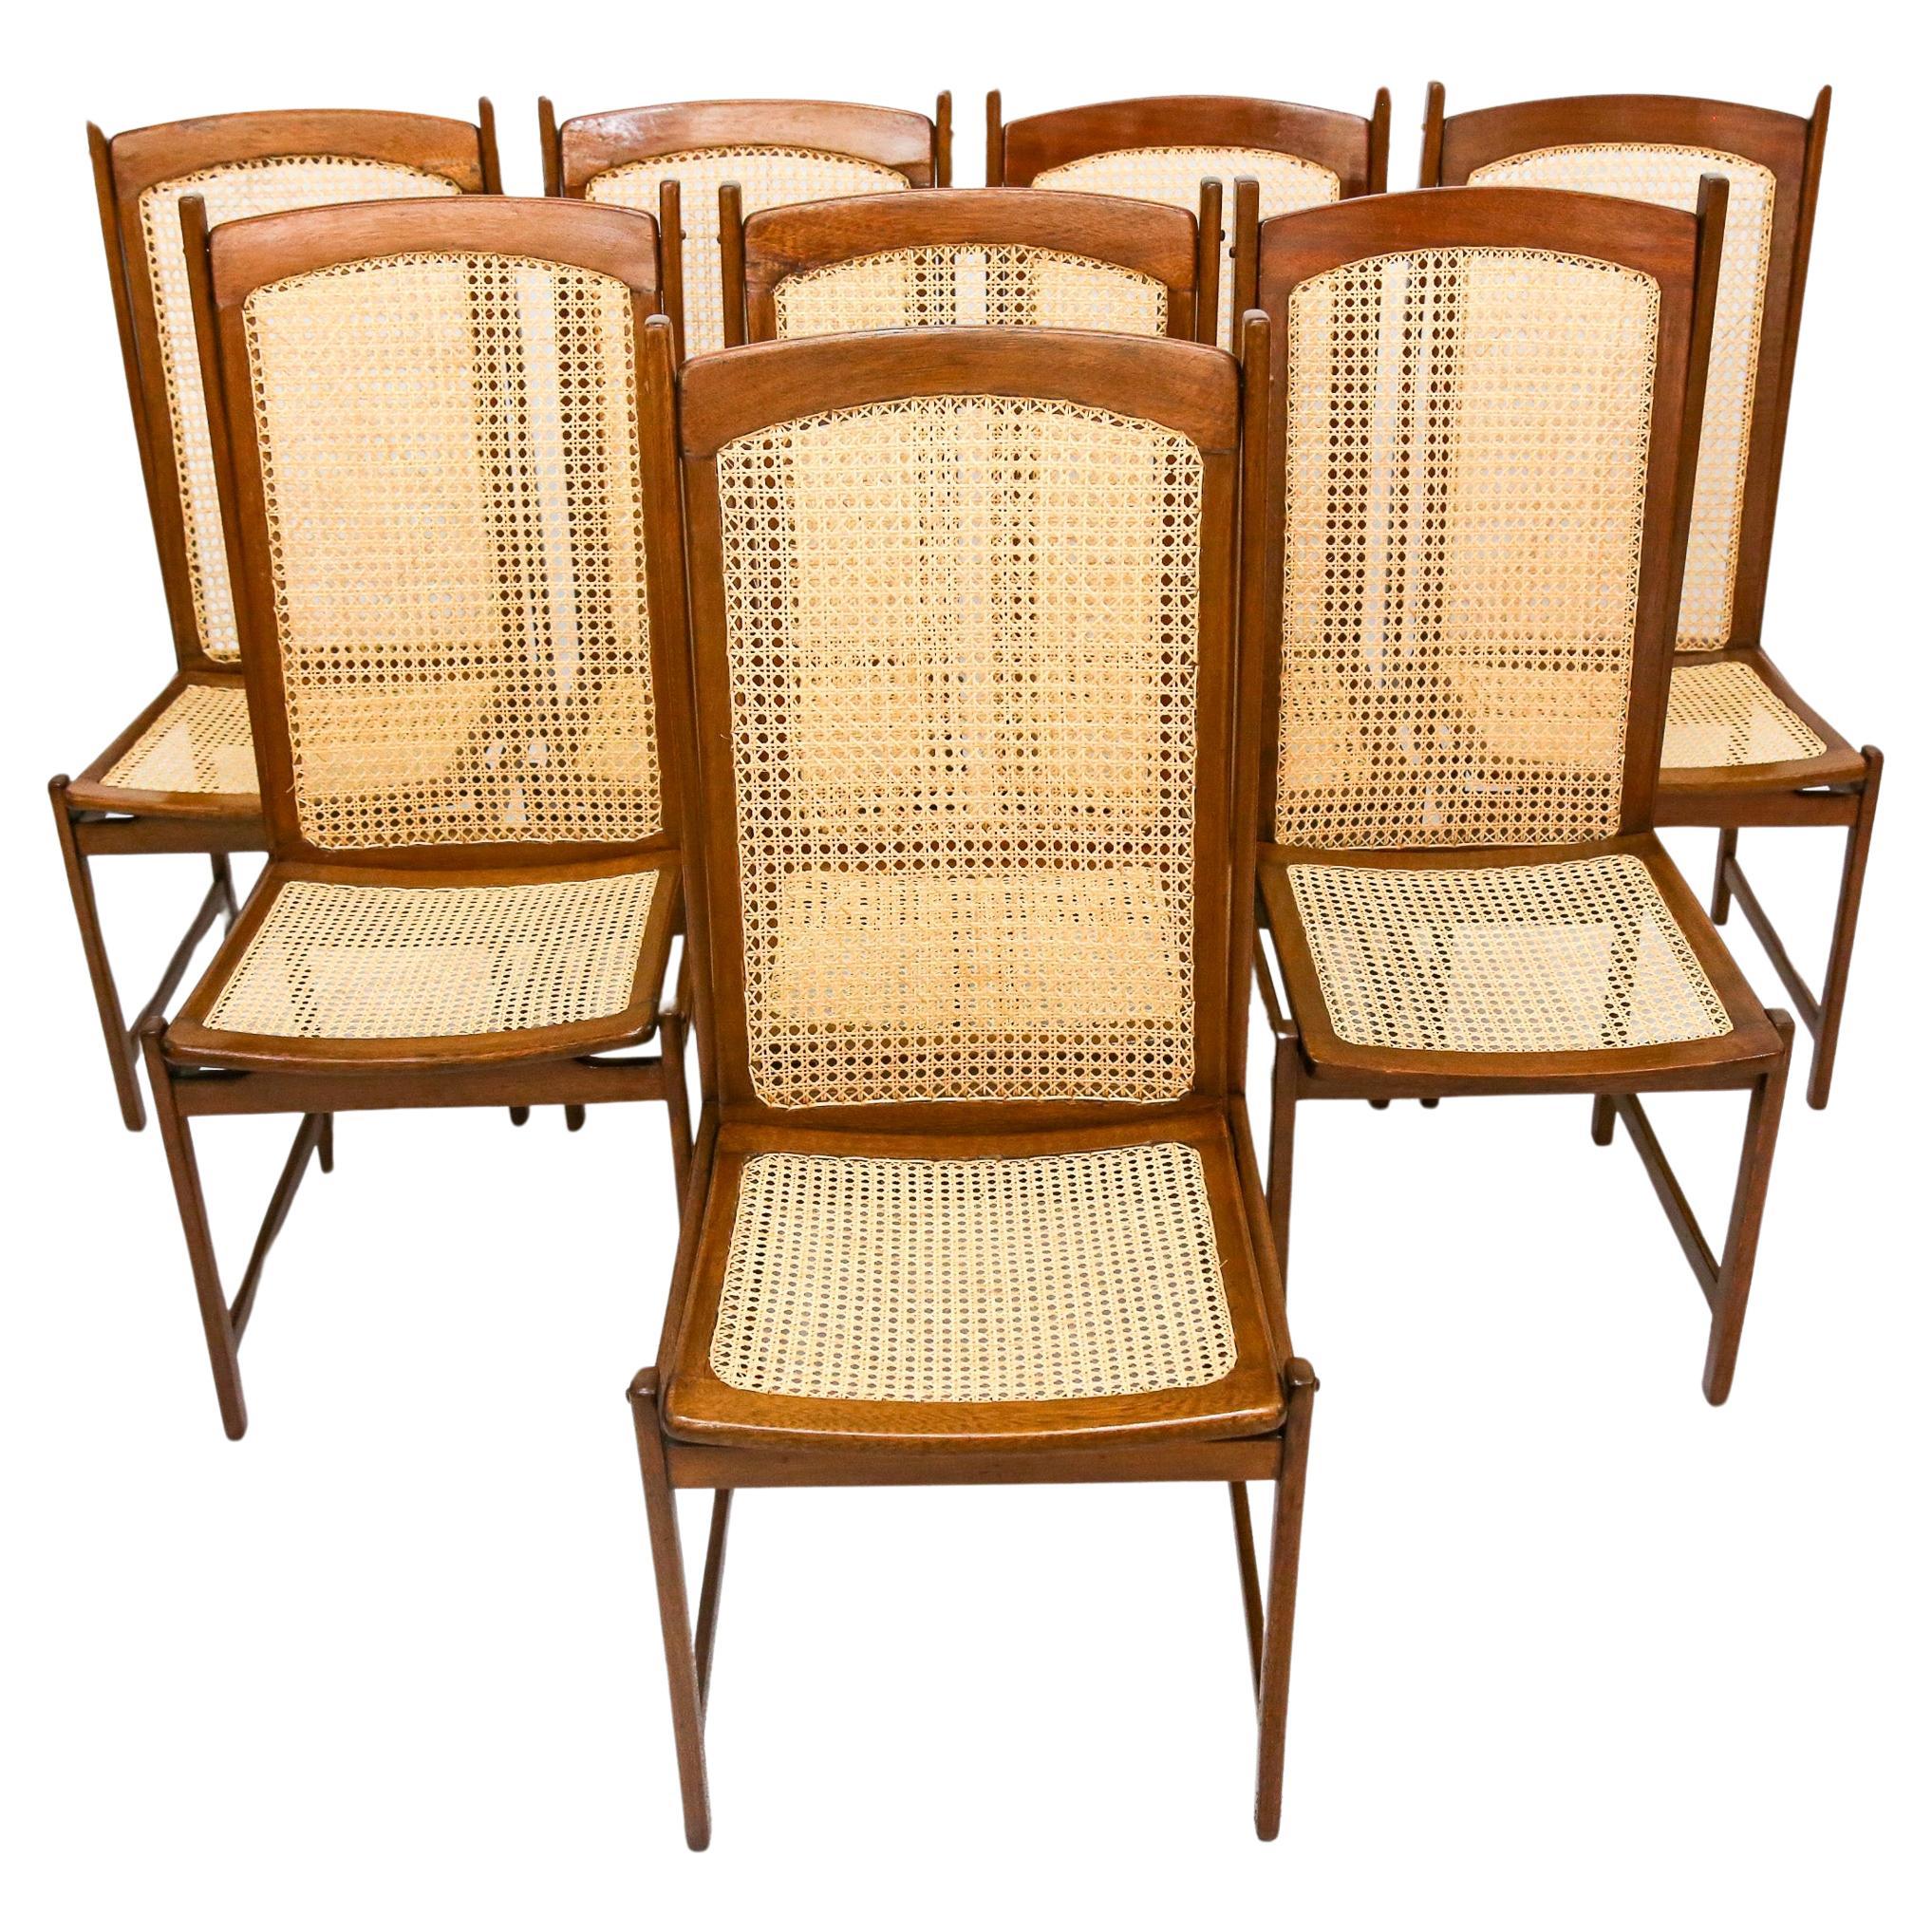 Mid-Century Modern Dining Chair Set in Hardwood & Caning, Celina, Brazil, 1960s For Sale